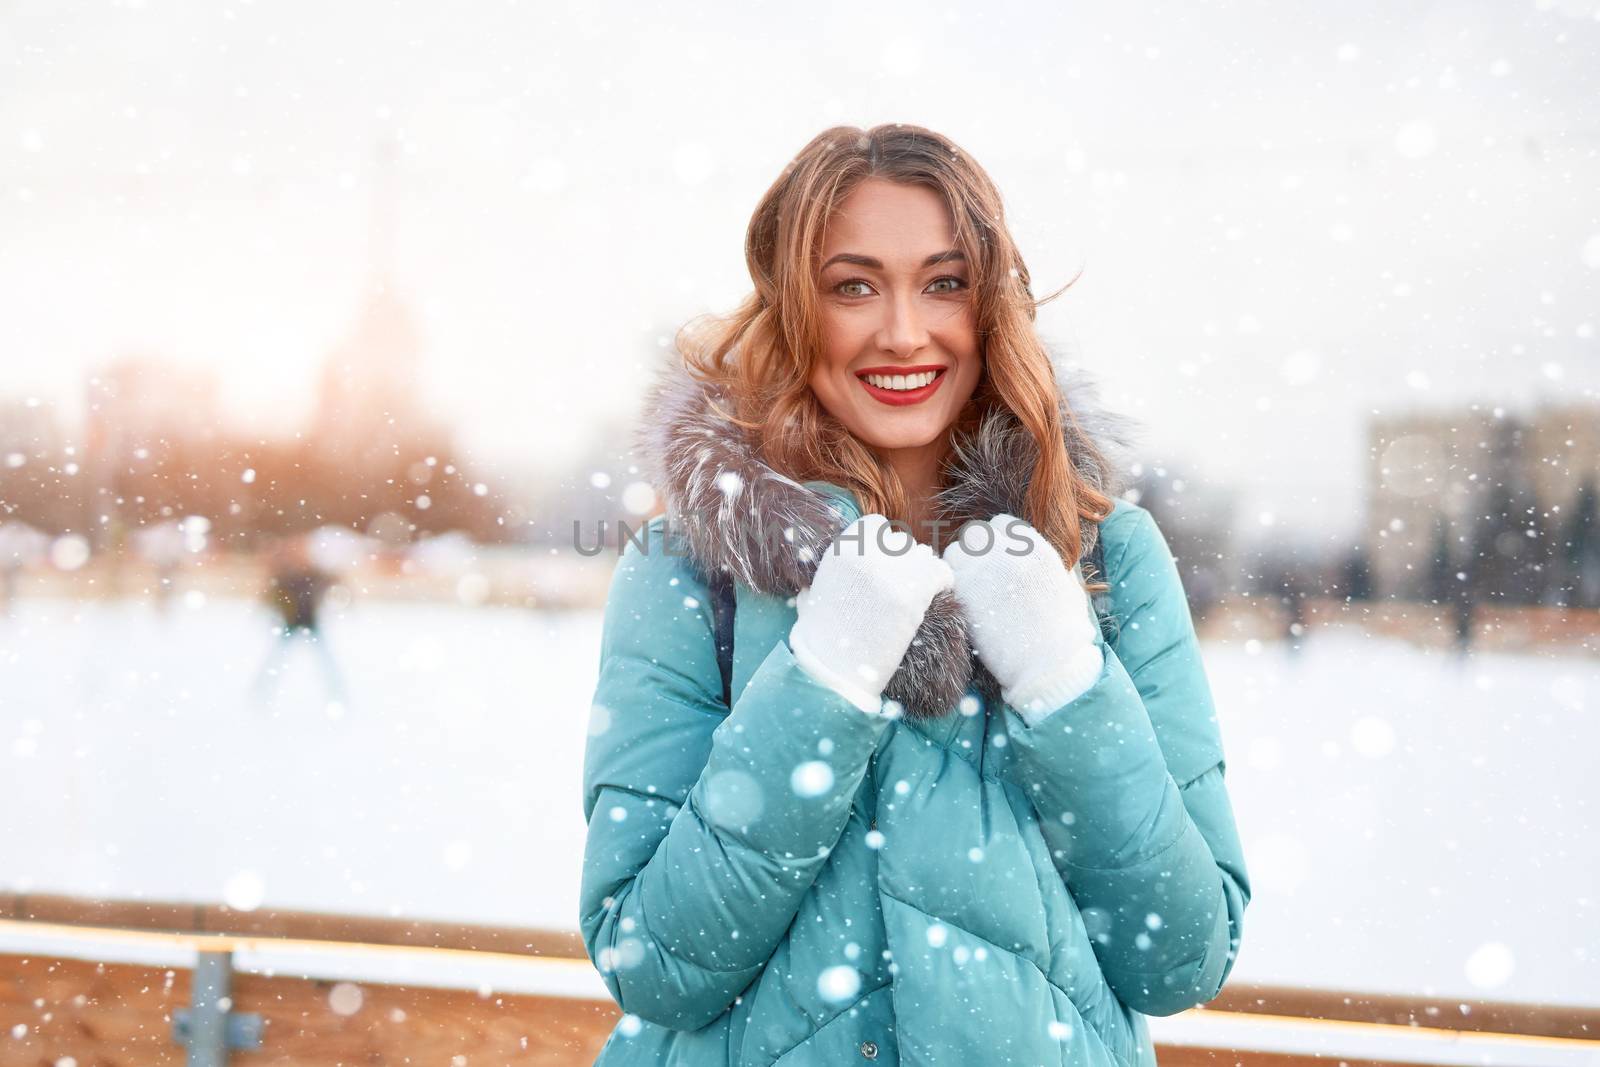 Beautiful lovely middle-aged girl curly hair warm winter jackets white glove stands ice rink background Town Square. Christmas mood lifestyle Happy holiday woman walk snowy day Winter leisure